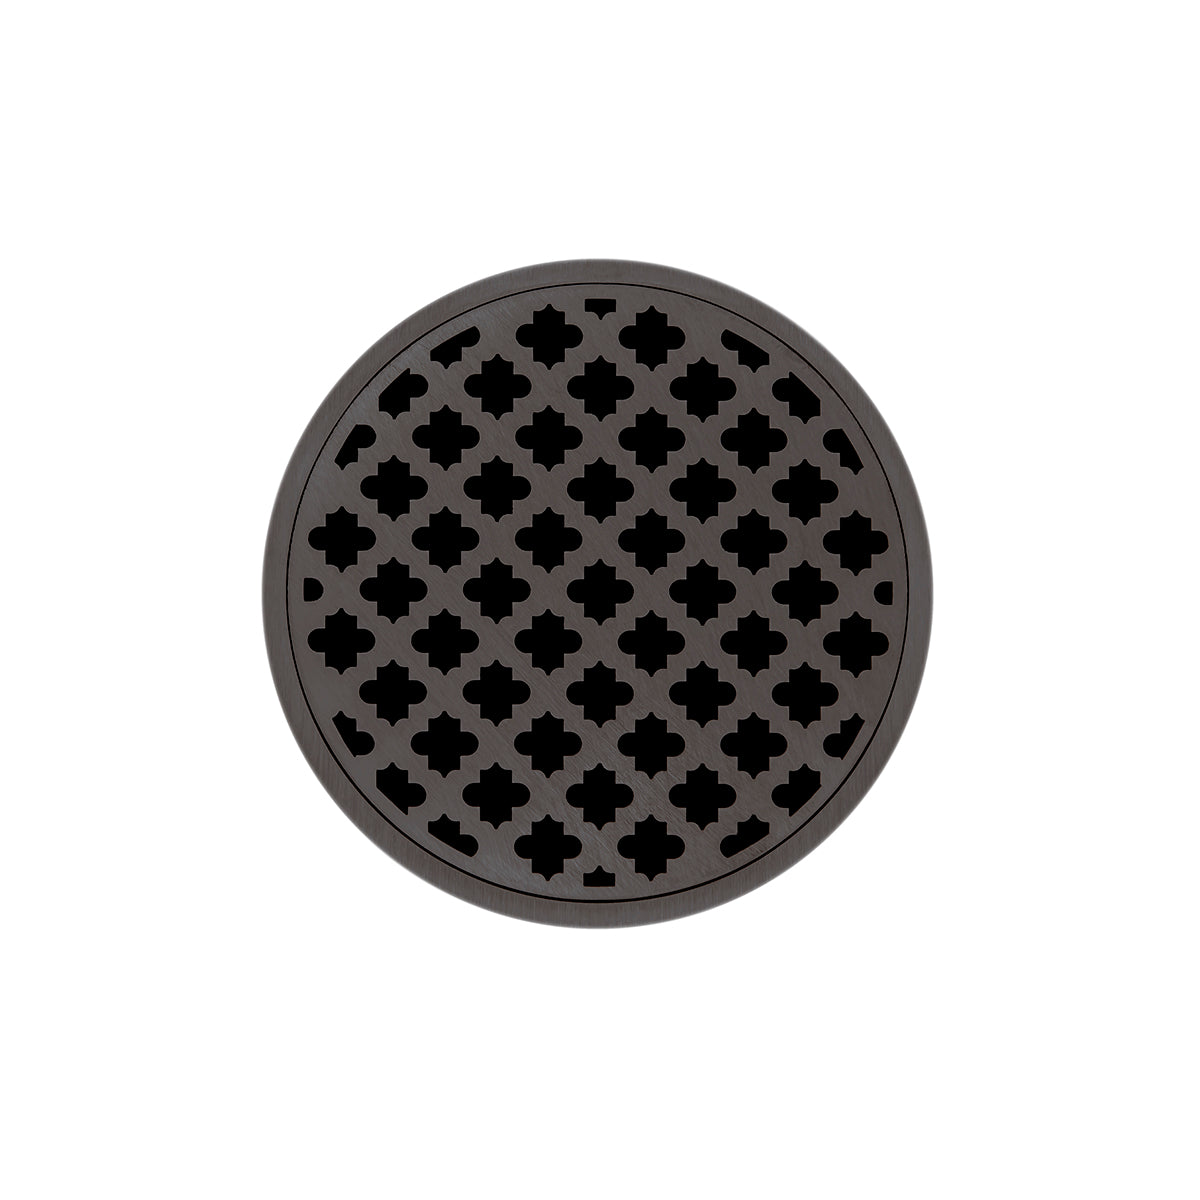 Infinity Drain 5" Round Strainer Premium Center Drain Kit with Moor Pattern Decorative Plate and 2" Throat for RMD 5